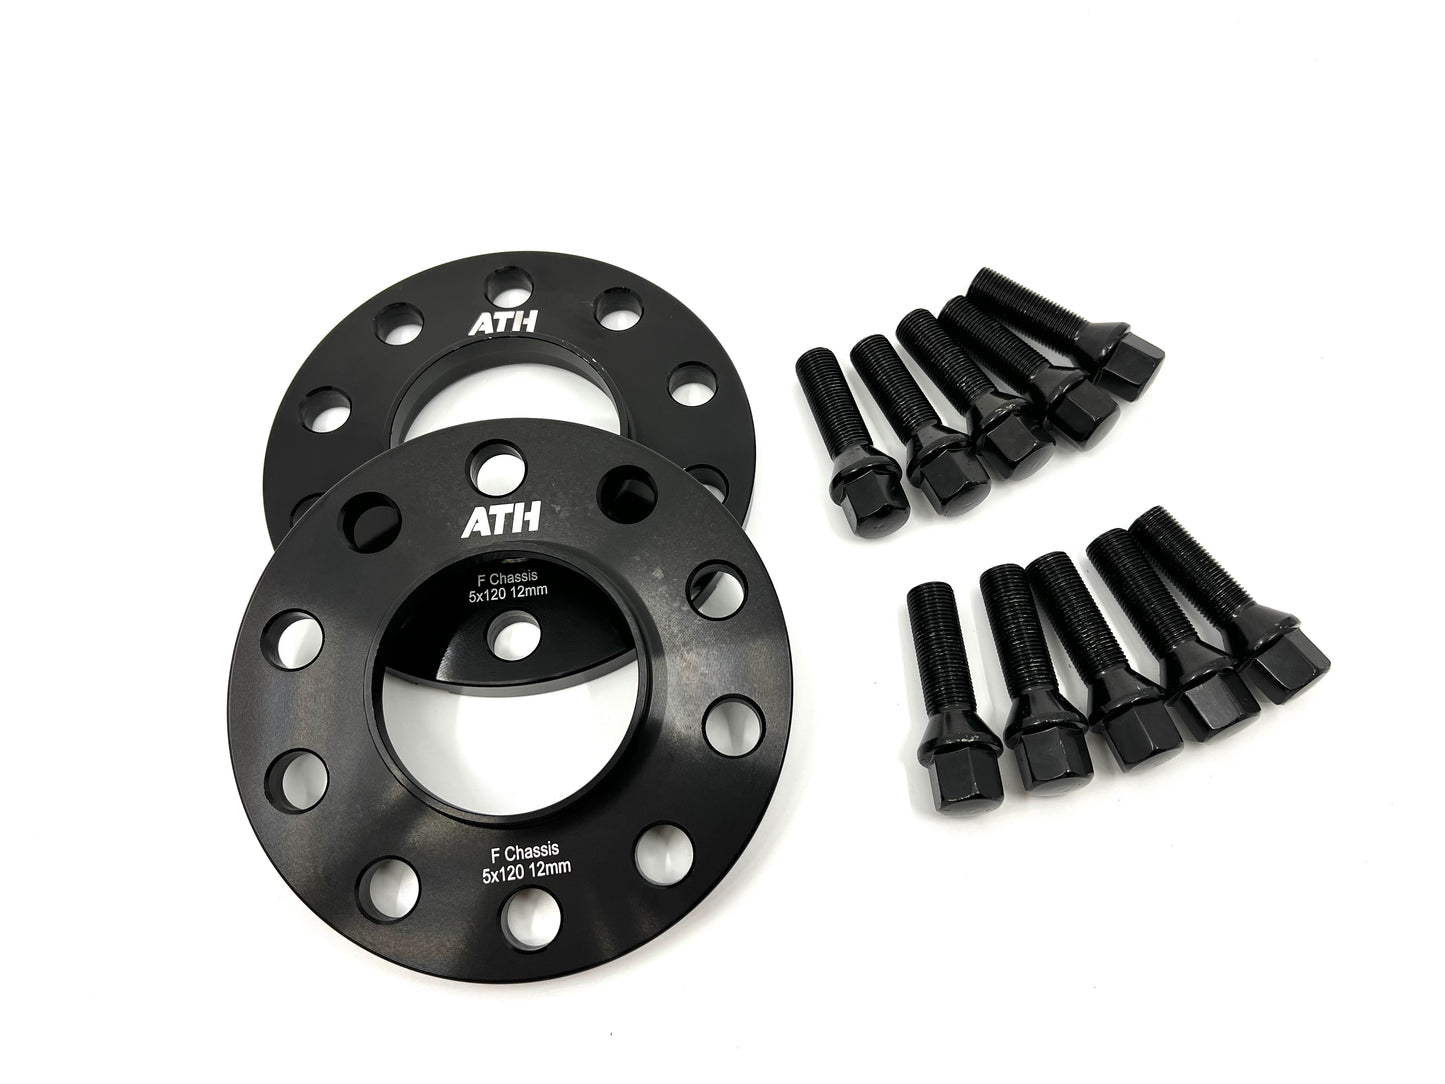 ATH F Chassis Wheel Spacers (12mm & 15mm)